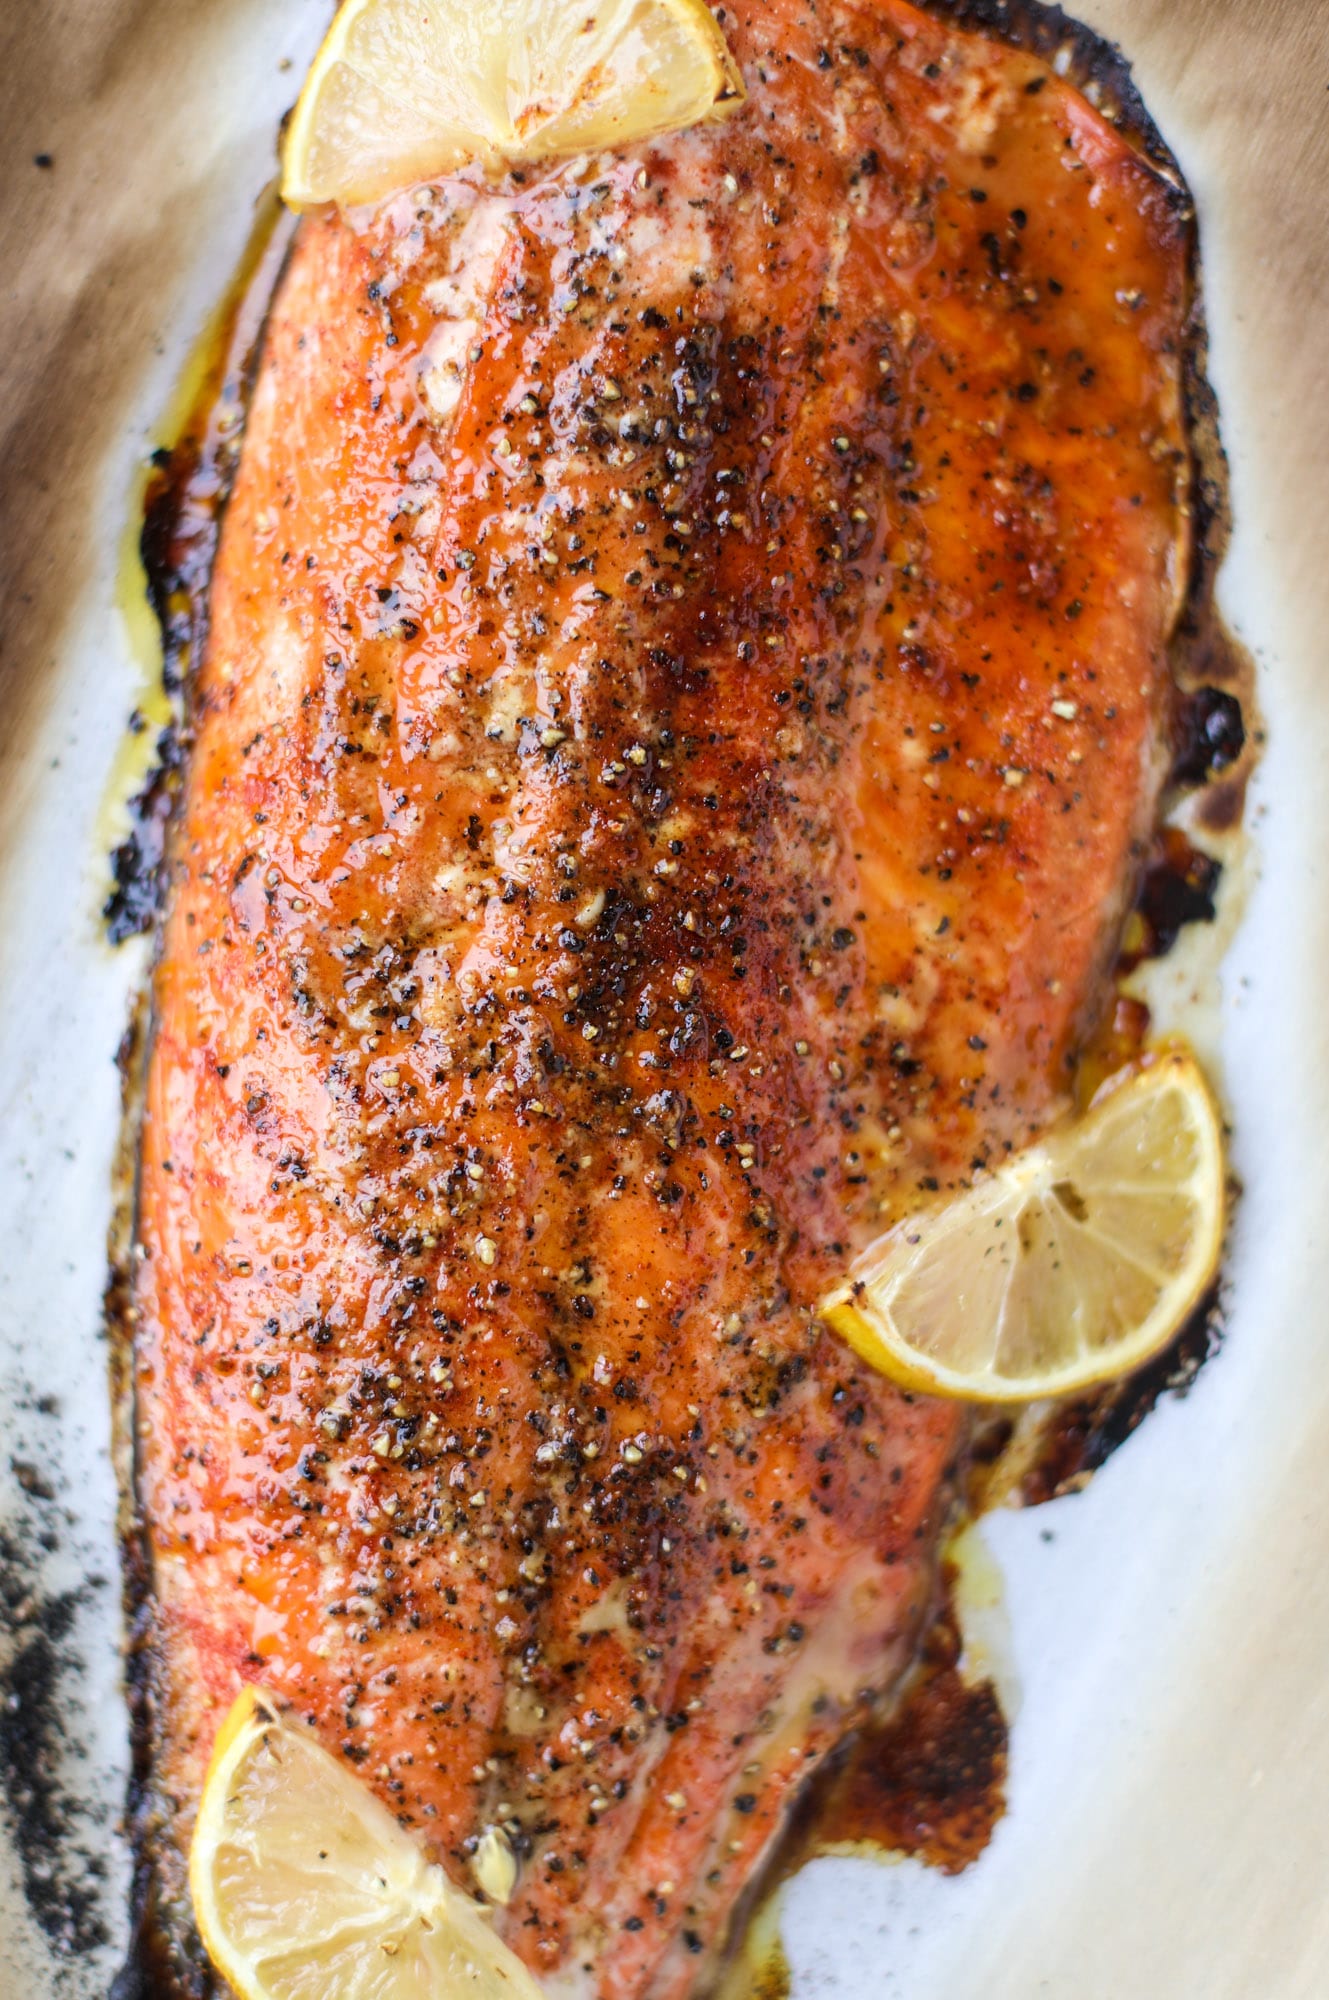 This hot honey salmon is flakey and buttery with a hint of heat and a sprtiz of lemon. It's an easy weeknight meal and is delicious on salads for lunch! I howsweeteats.com #hothoney #salmon